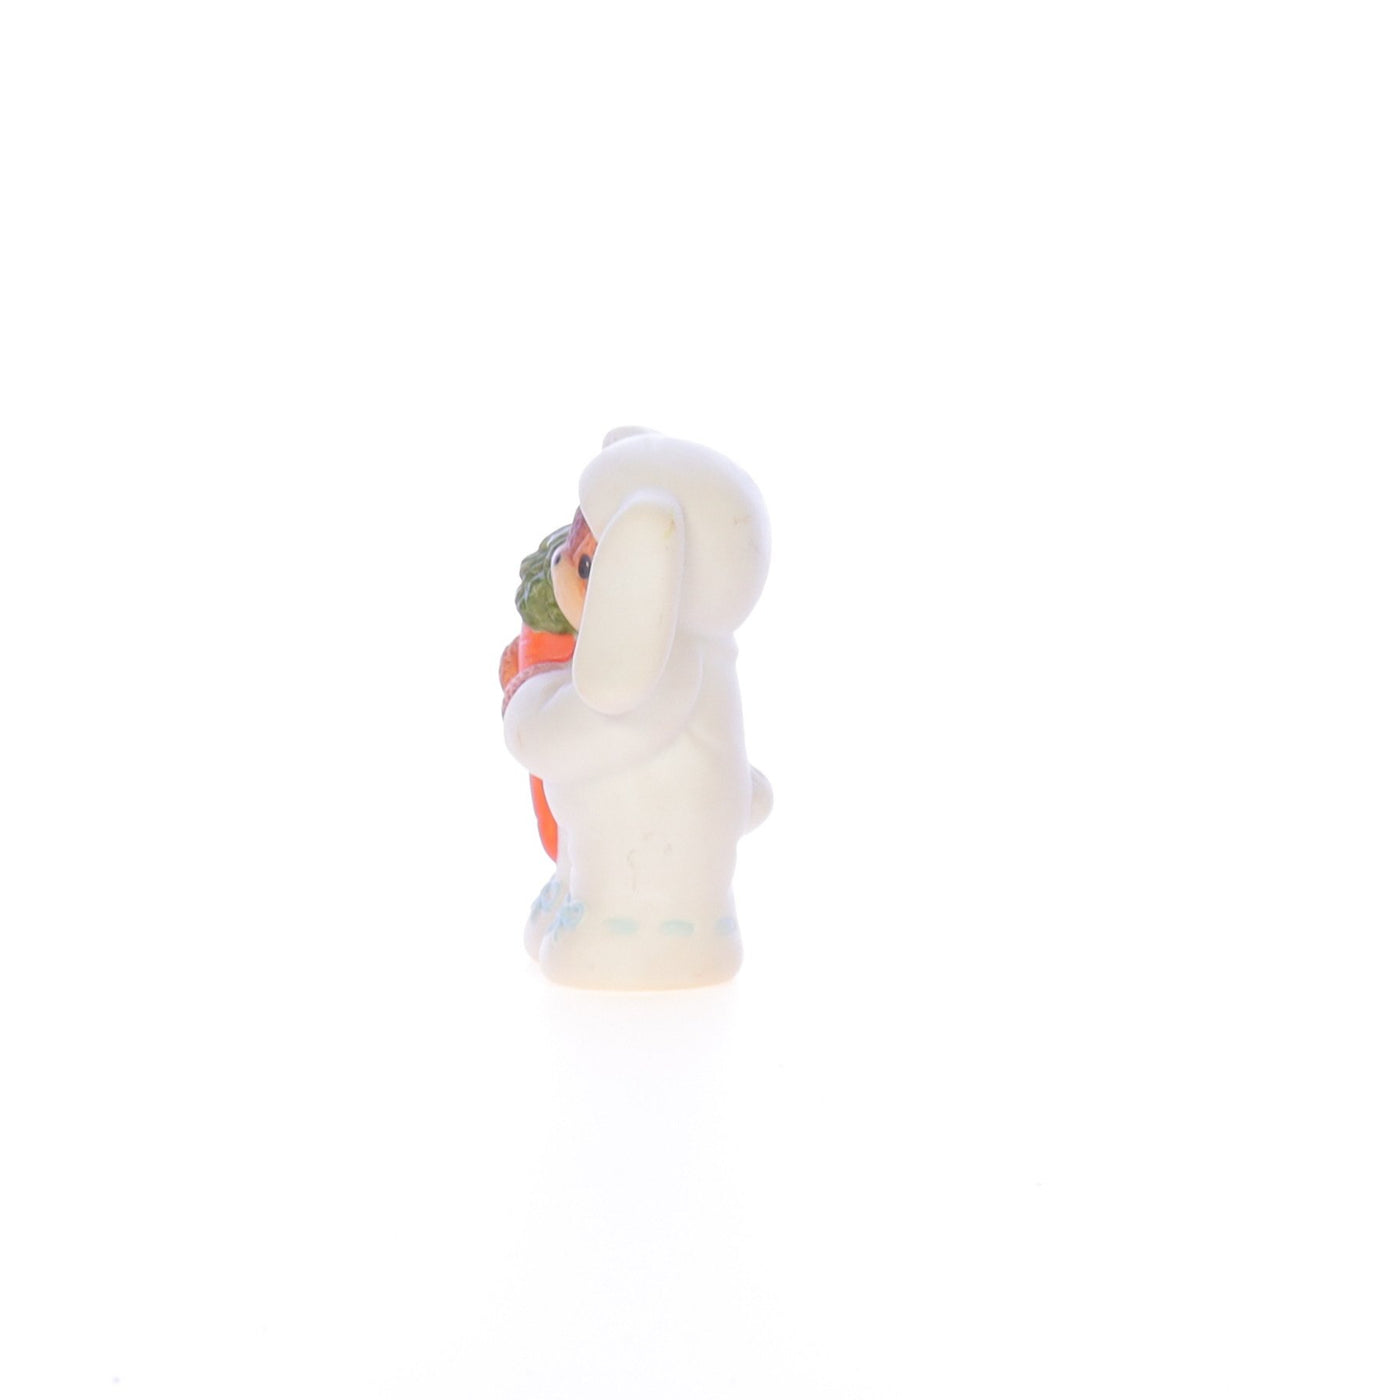 Lucy_And_Me_by_Lucy_Atwell_Porcelain_Figurine_Bear_in_Easter_Bunny_Costume_Lucy_Unknown_040_03